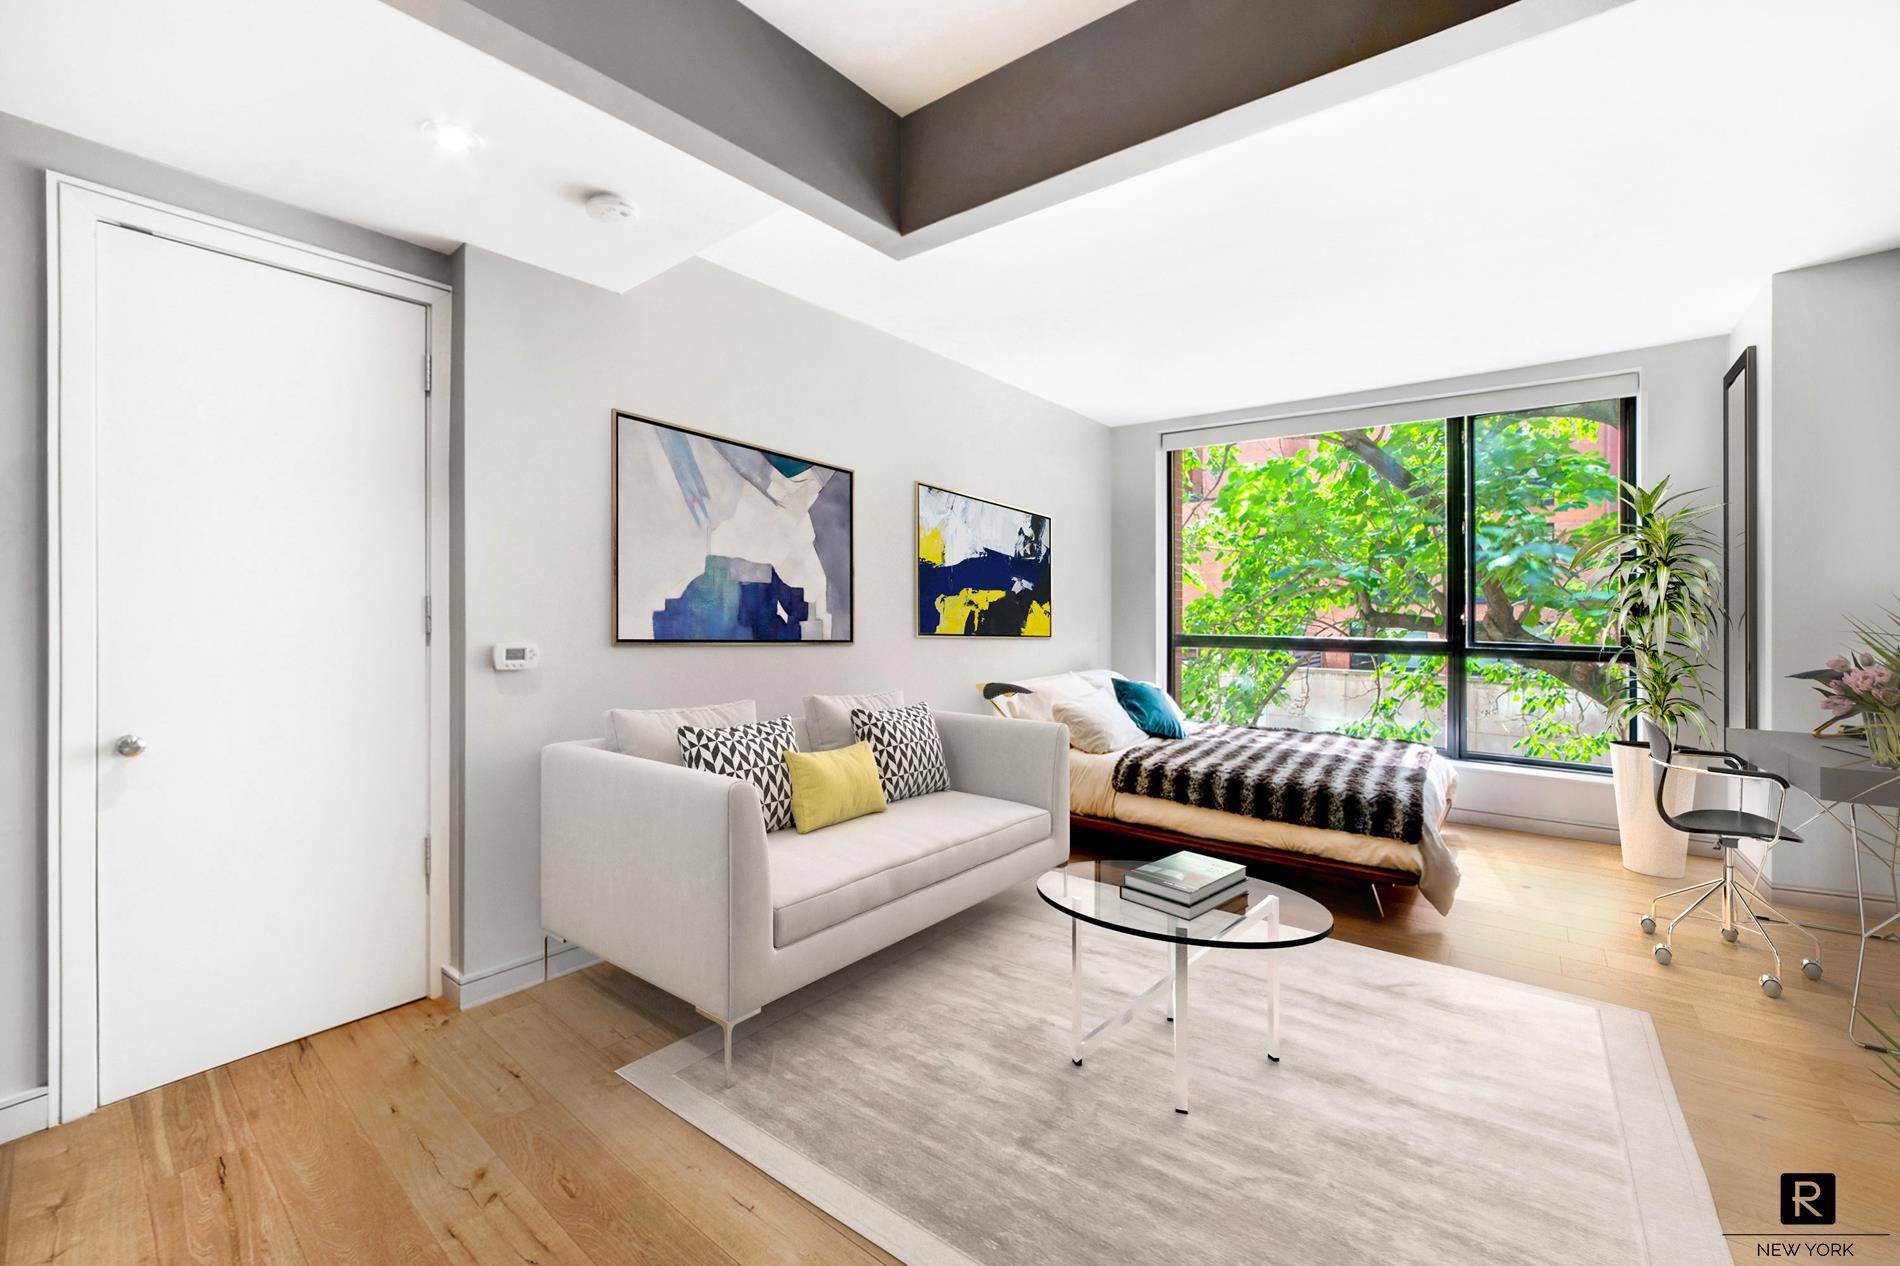 Welcome to your new home where West Chelsea meets Hudson Yards !